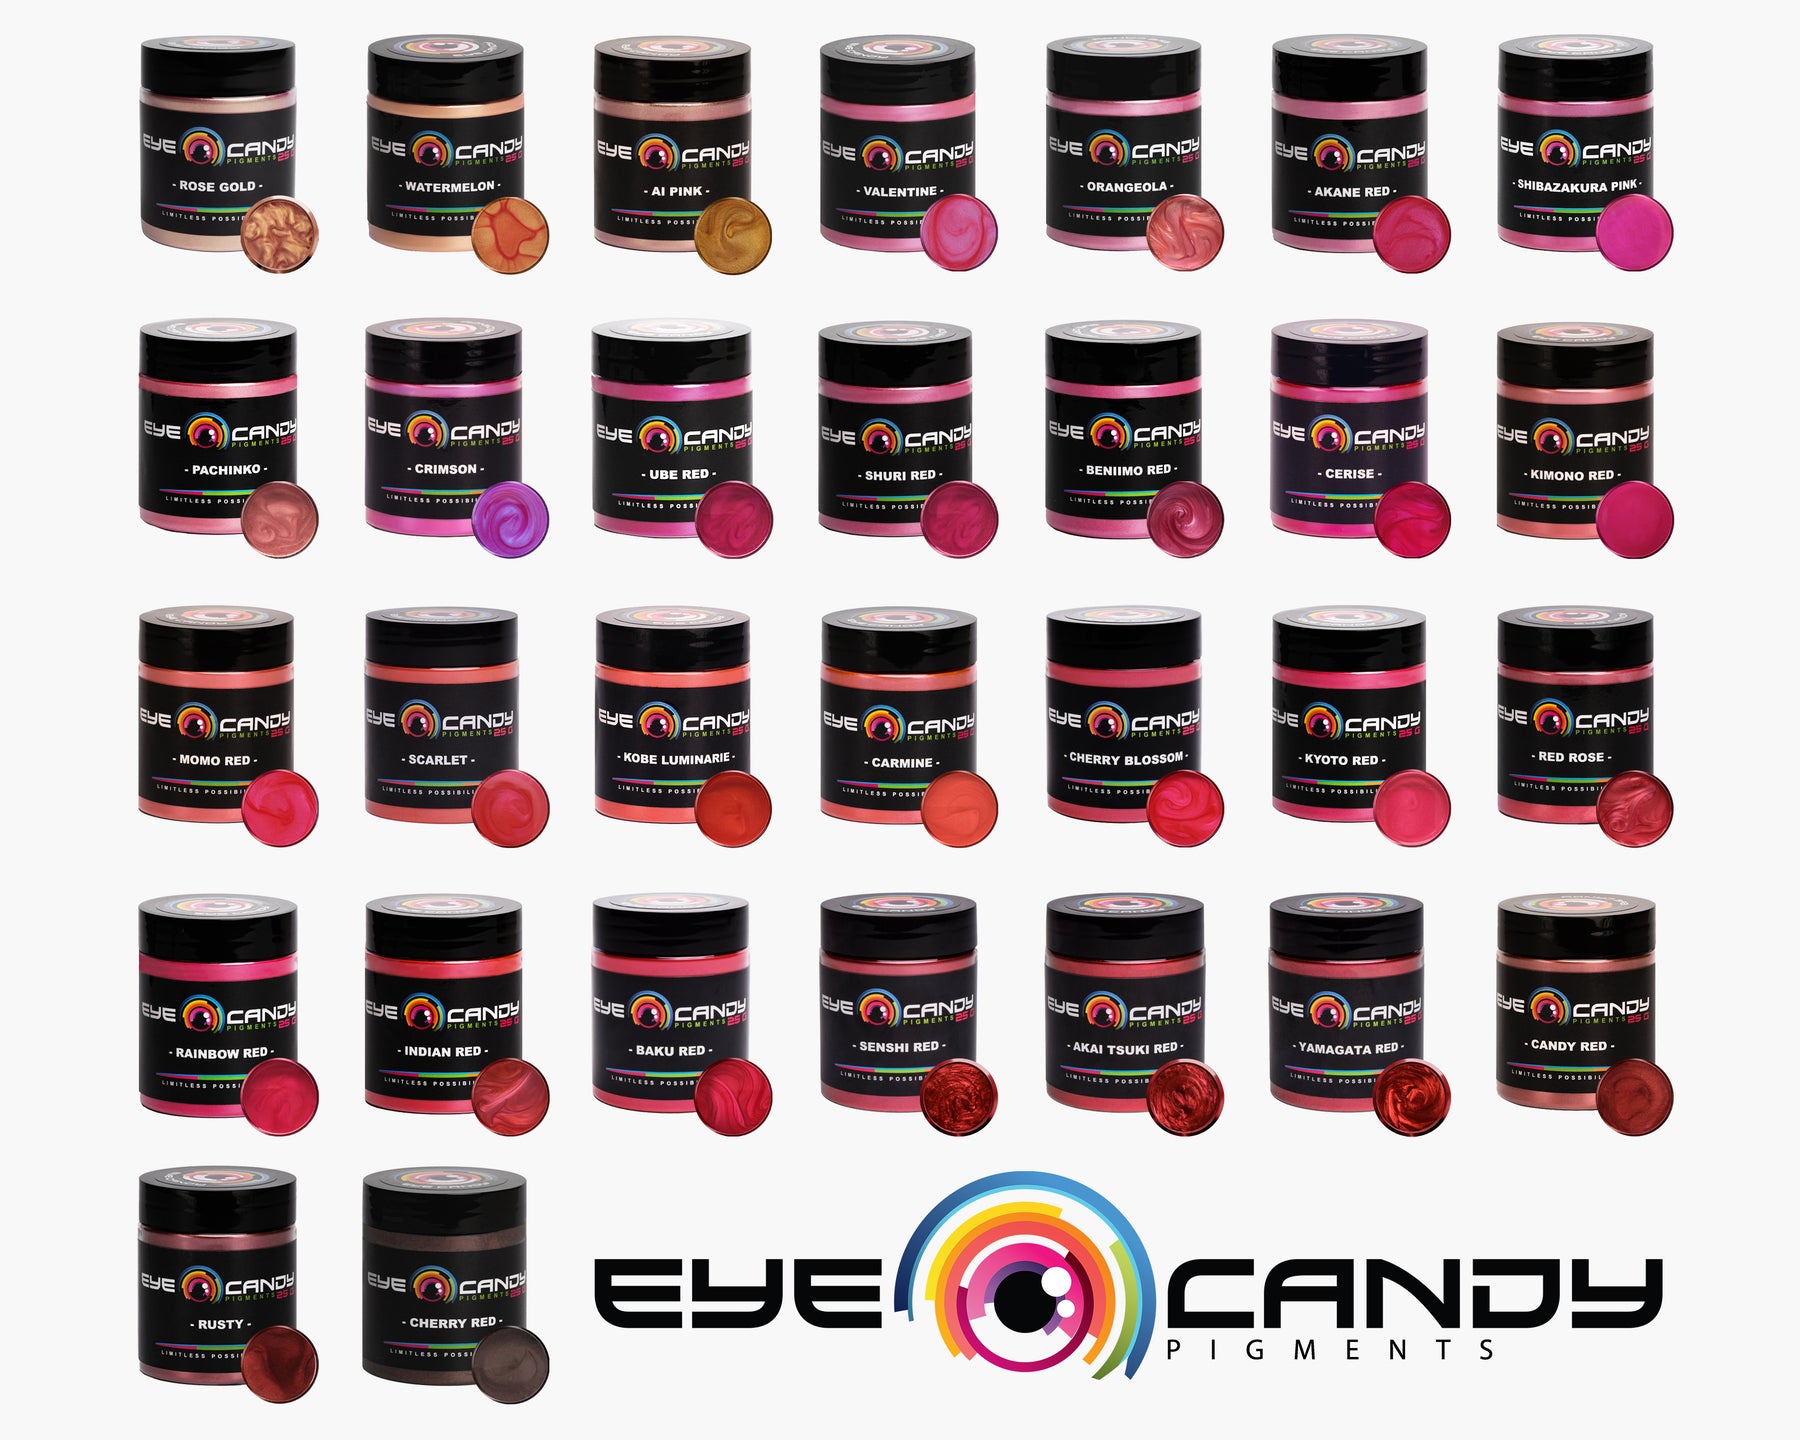 Cerise - Eye Candy Pigments - Red Mica Pigment Powders